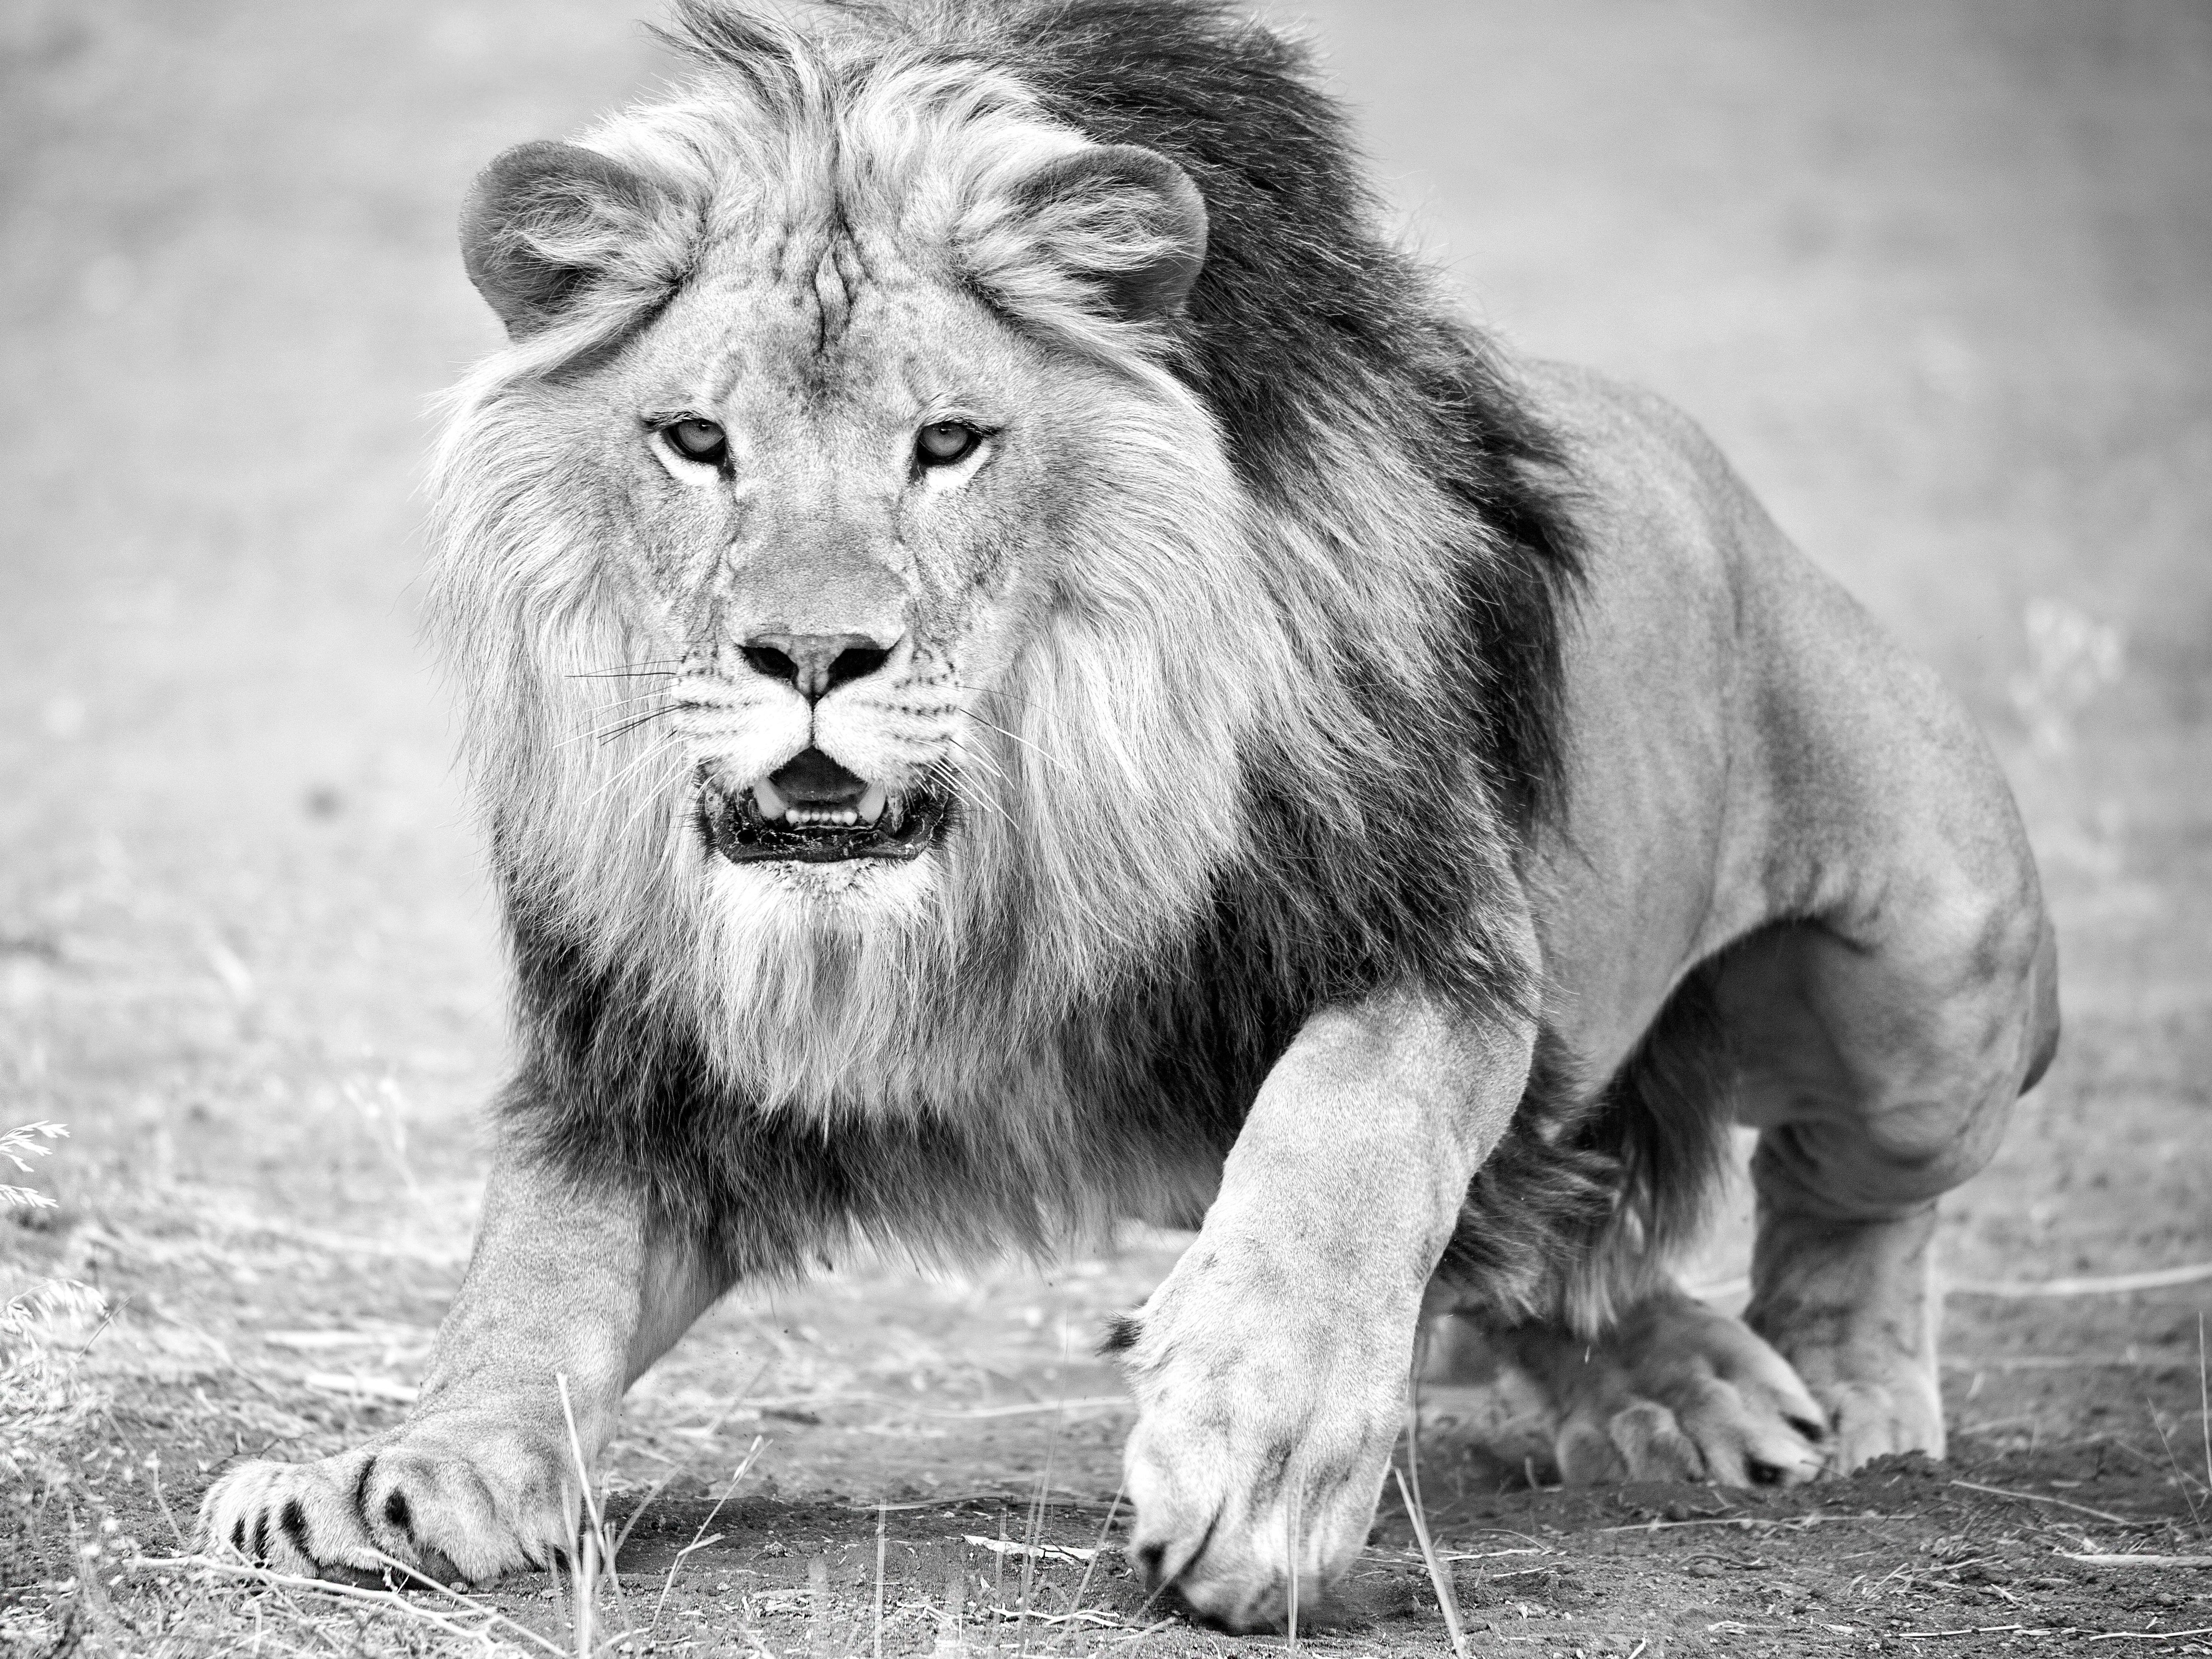 "The Charge" 28x40 - Black & White Photography, Lion Photograph, Unsigned Print